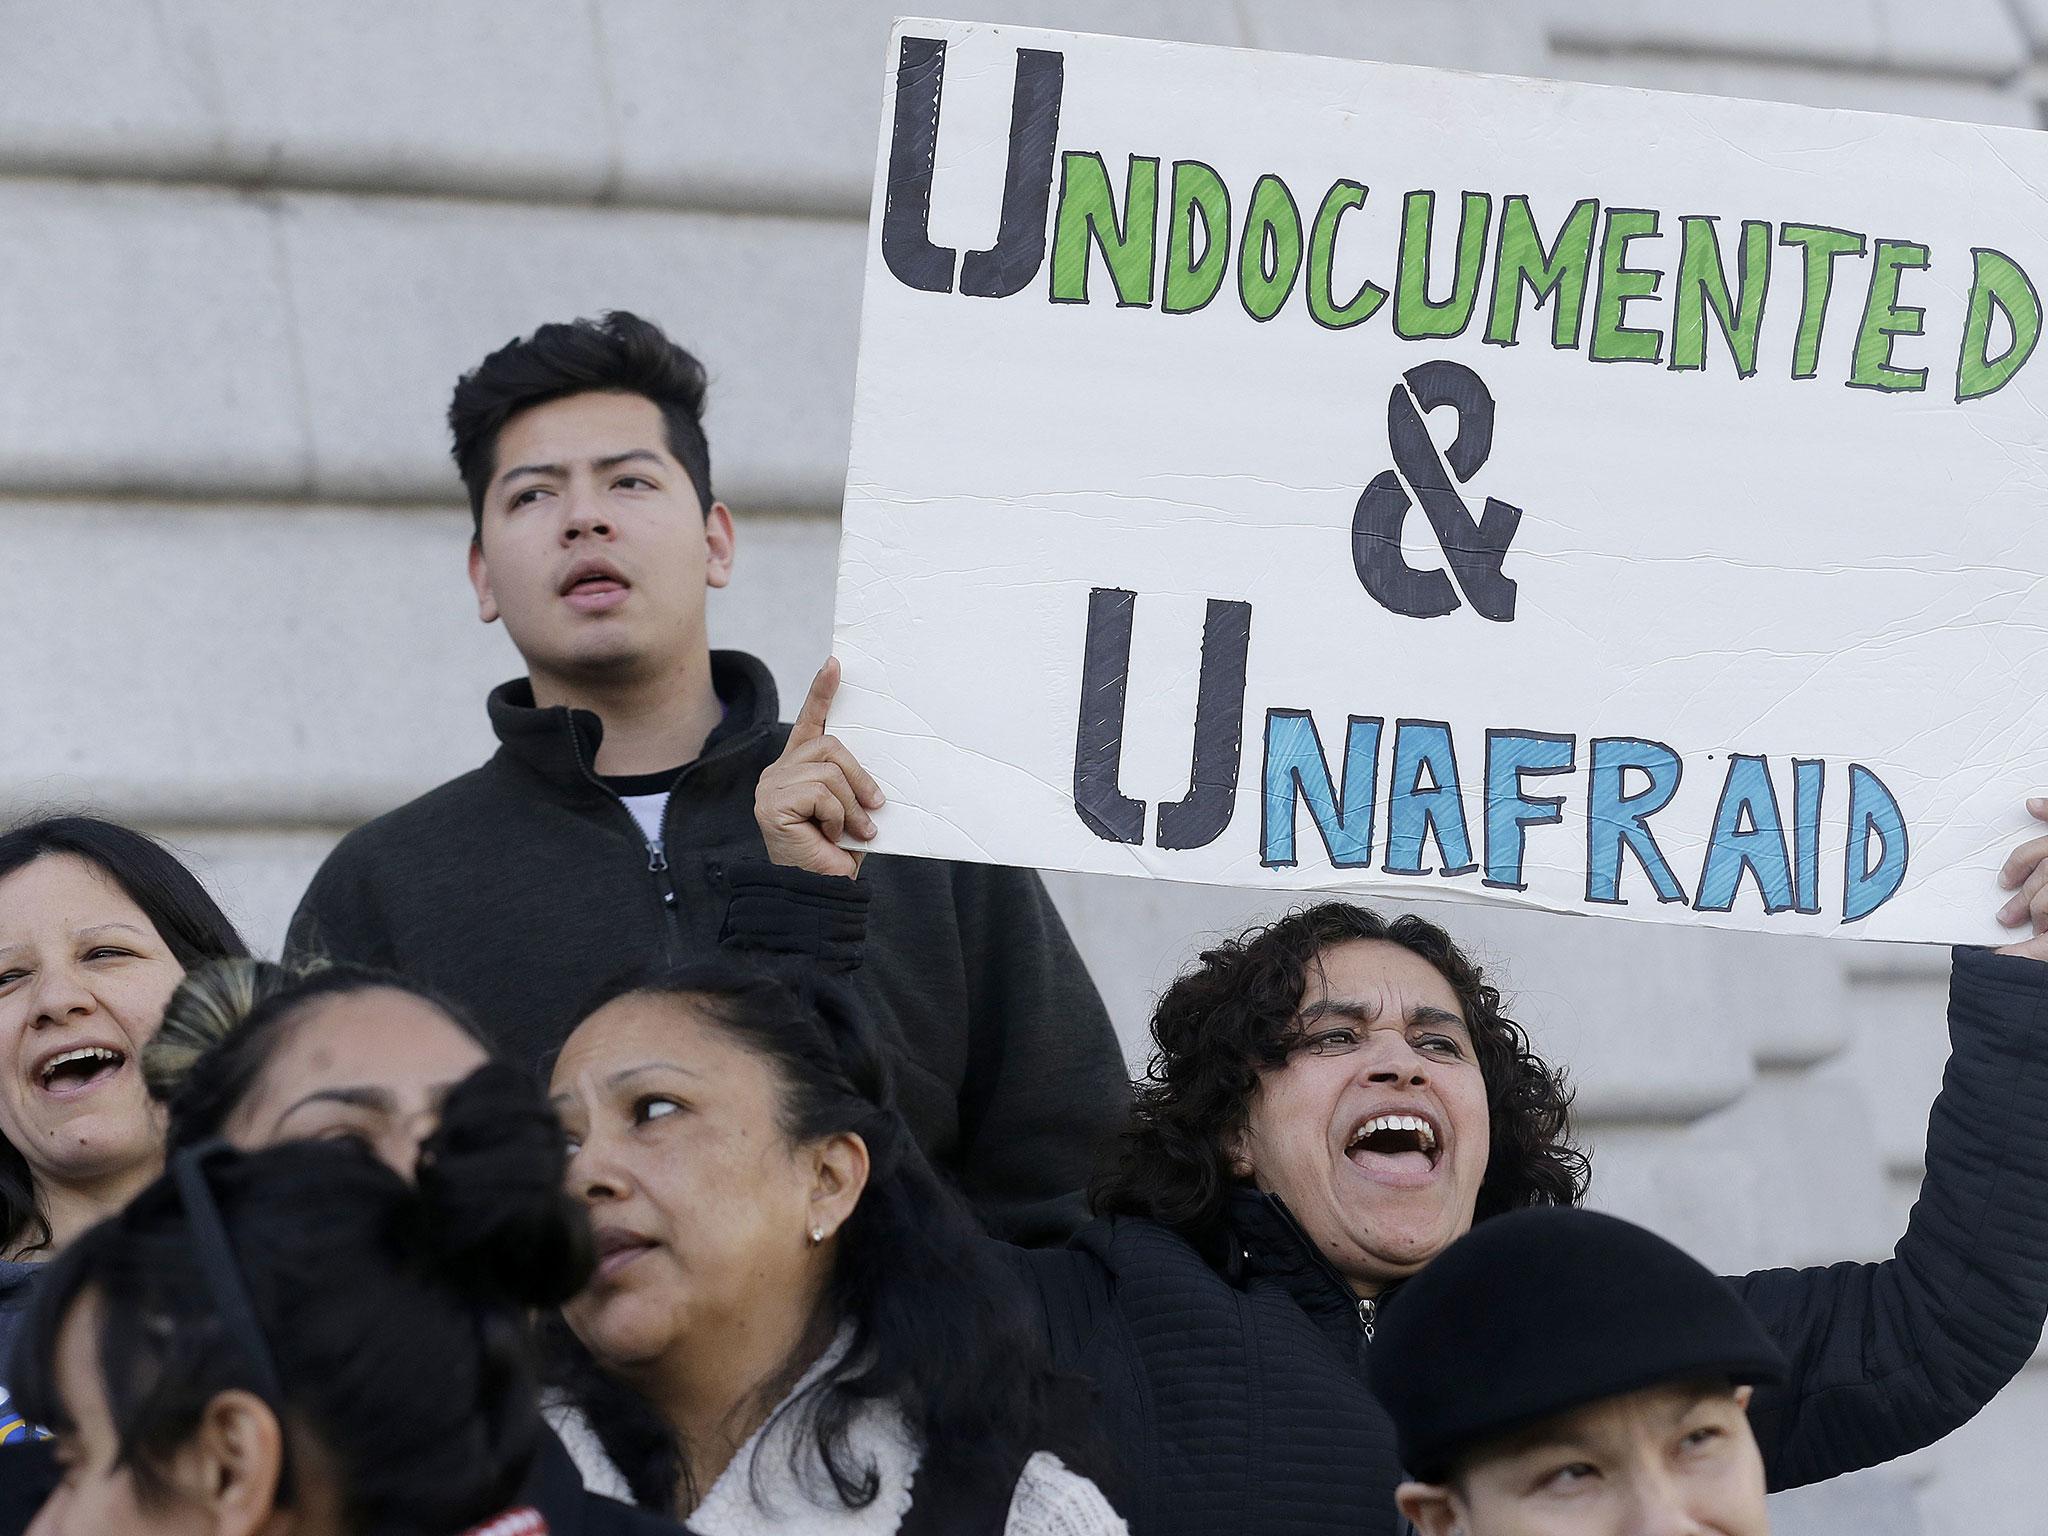 Many Americans wrongly believe undocumented immigrants do not have constitutional rights